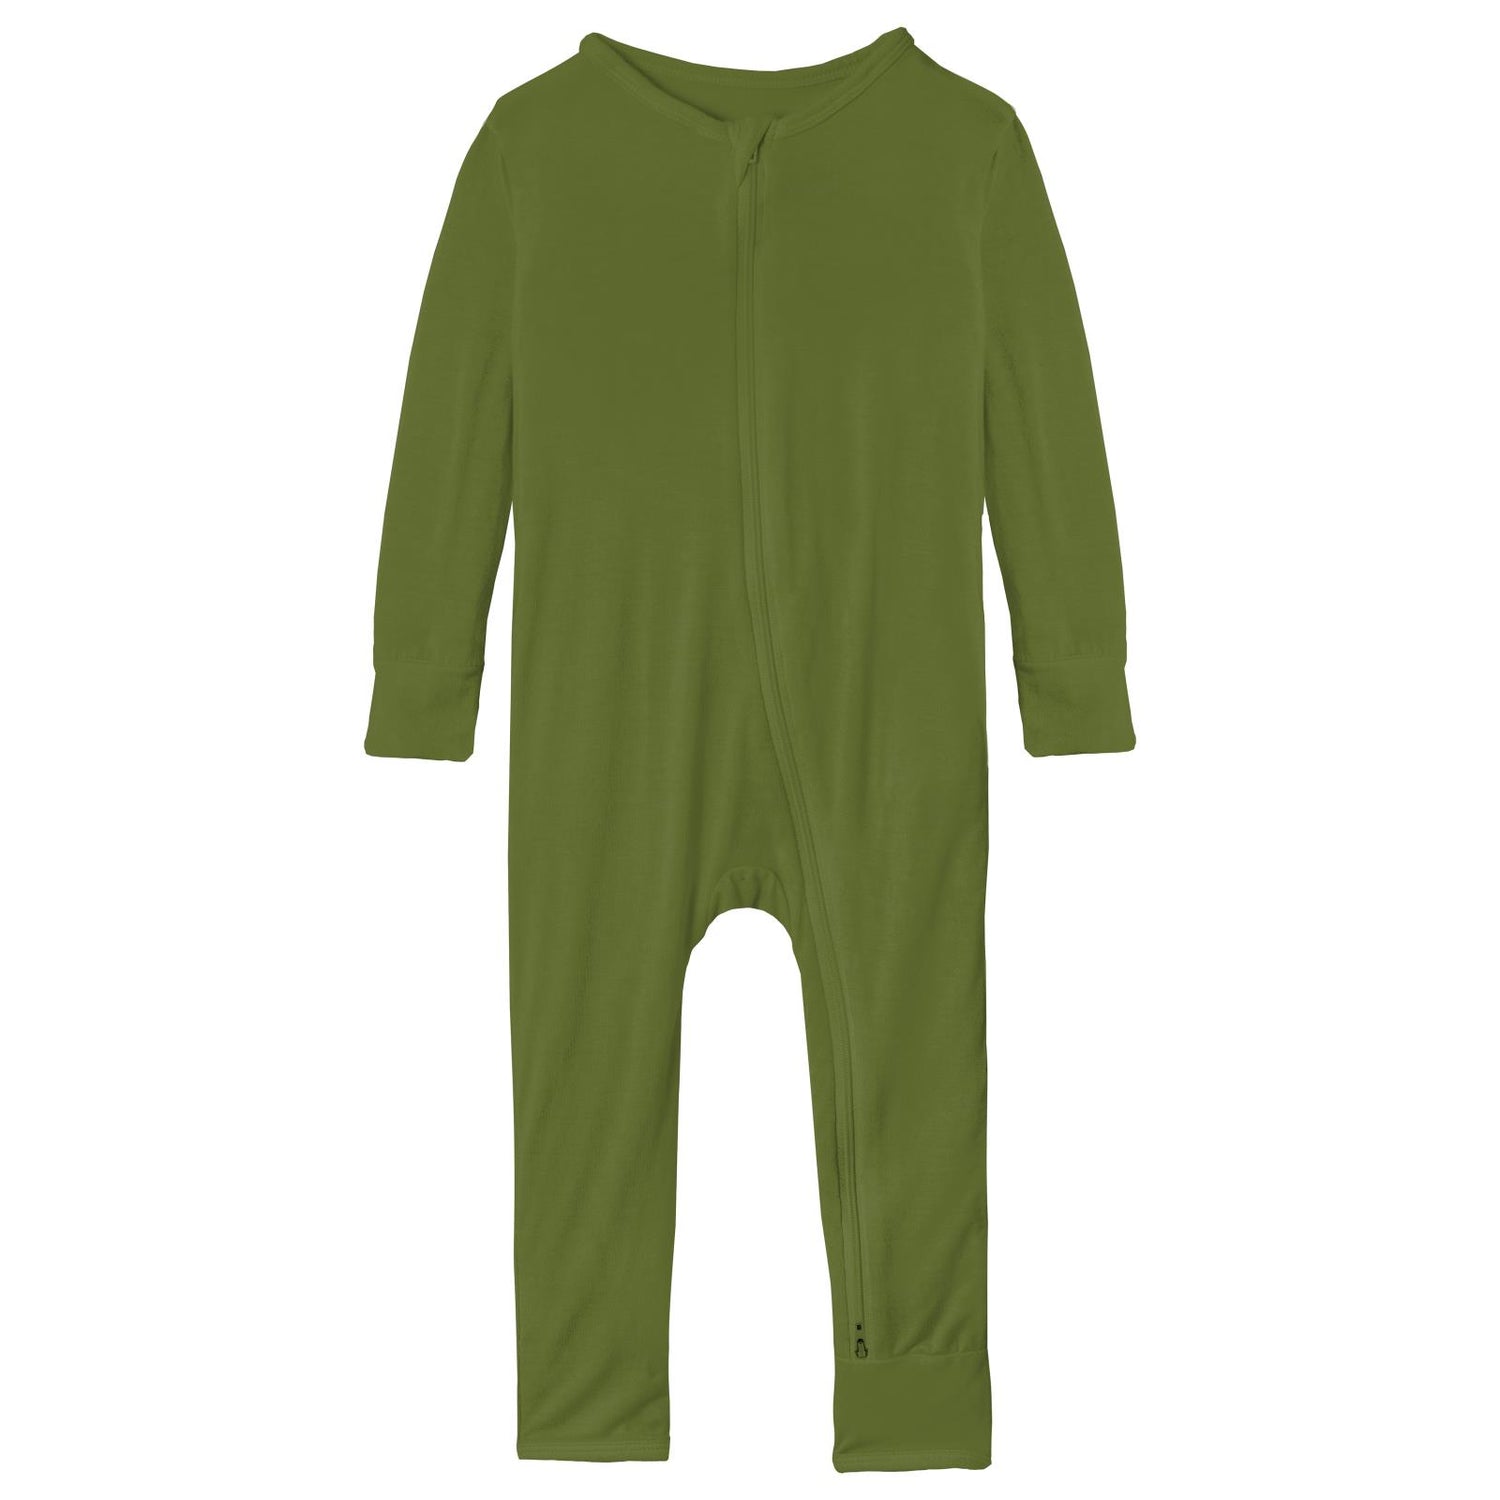 Coverall with 2 Way Zipper in Moss